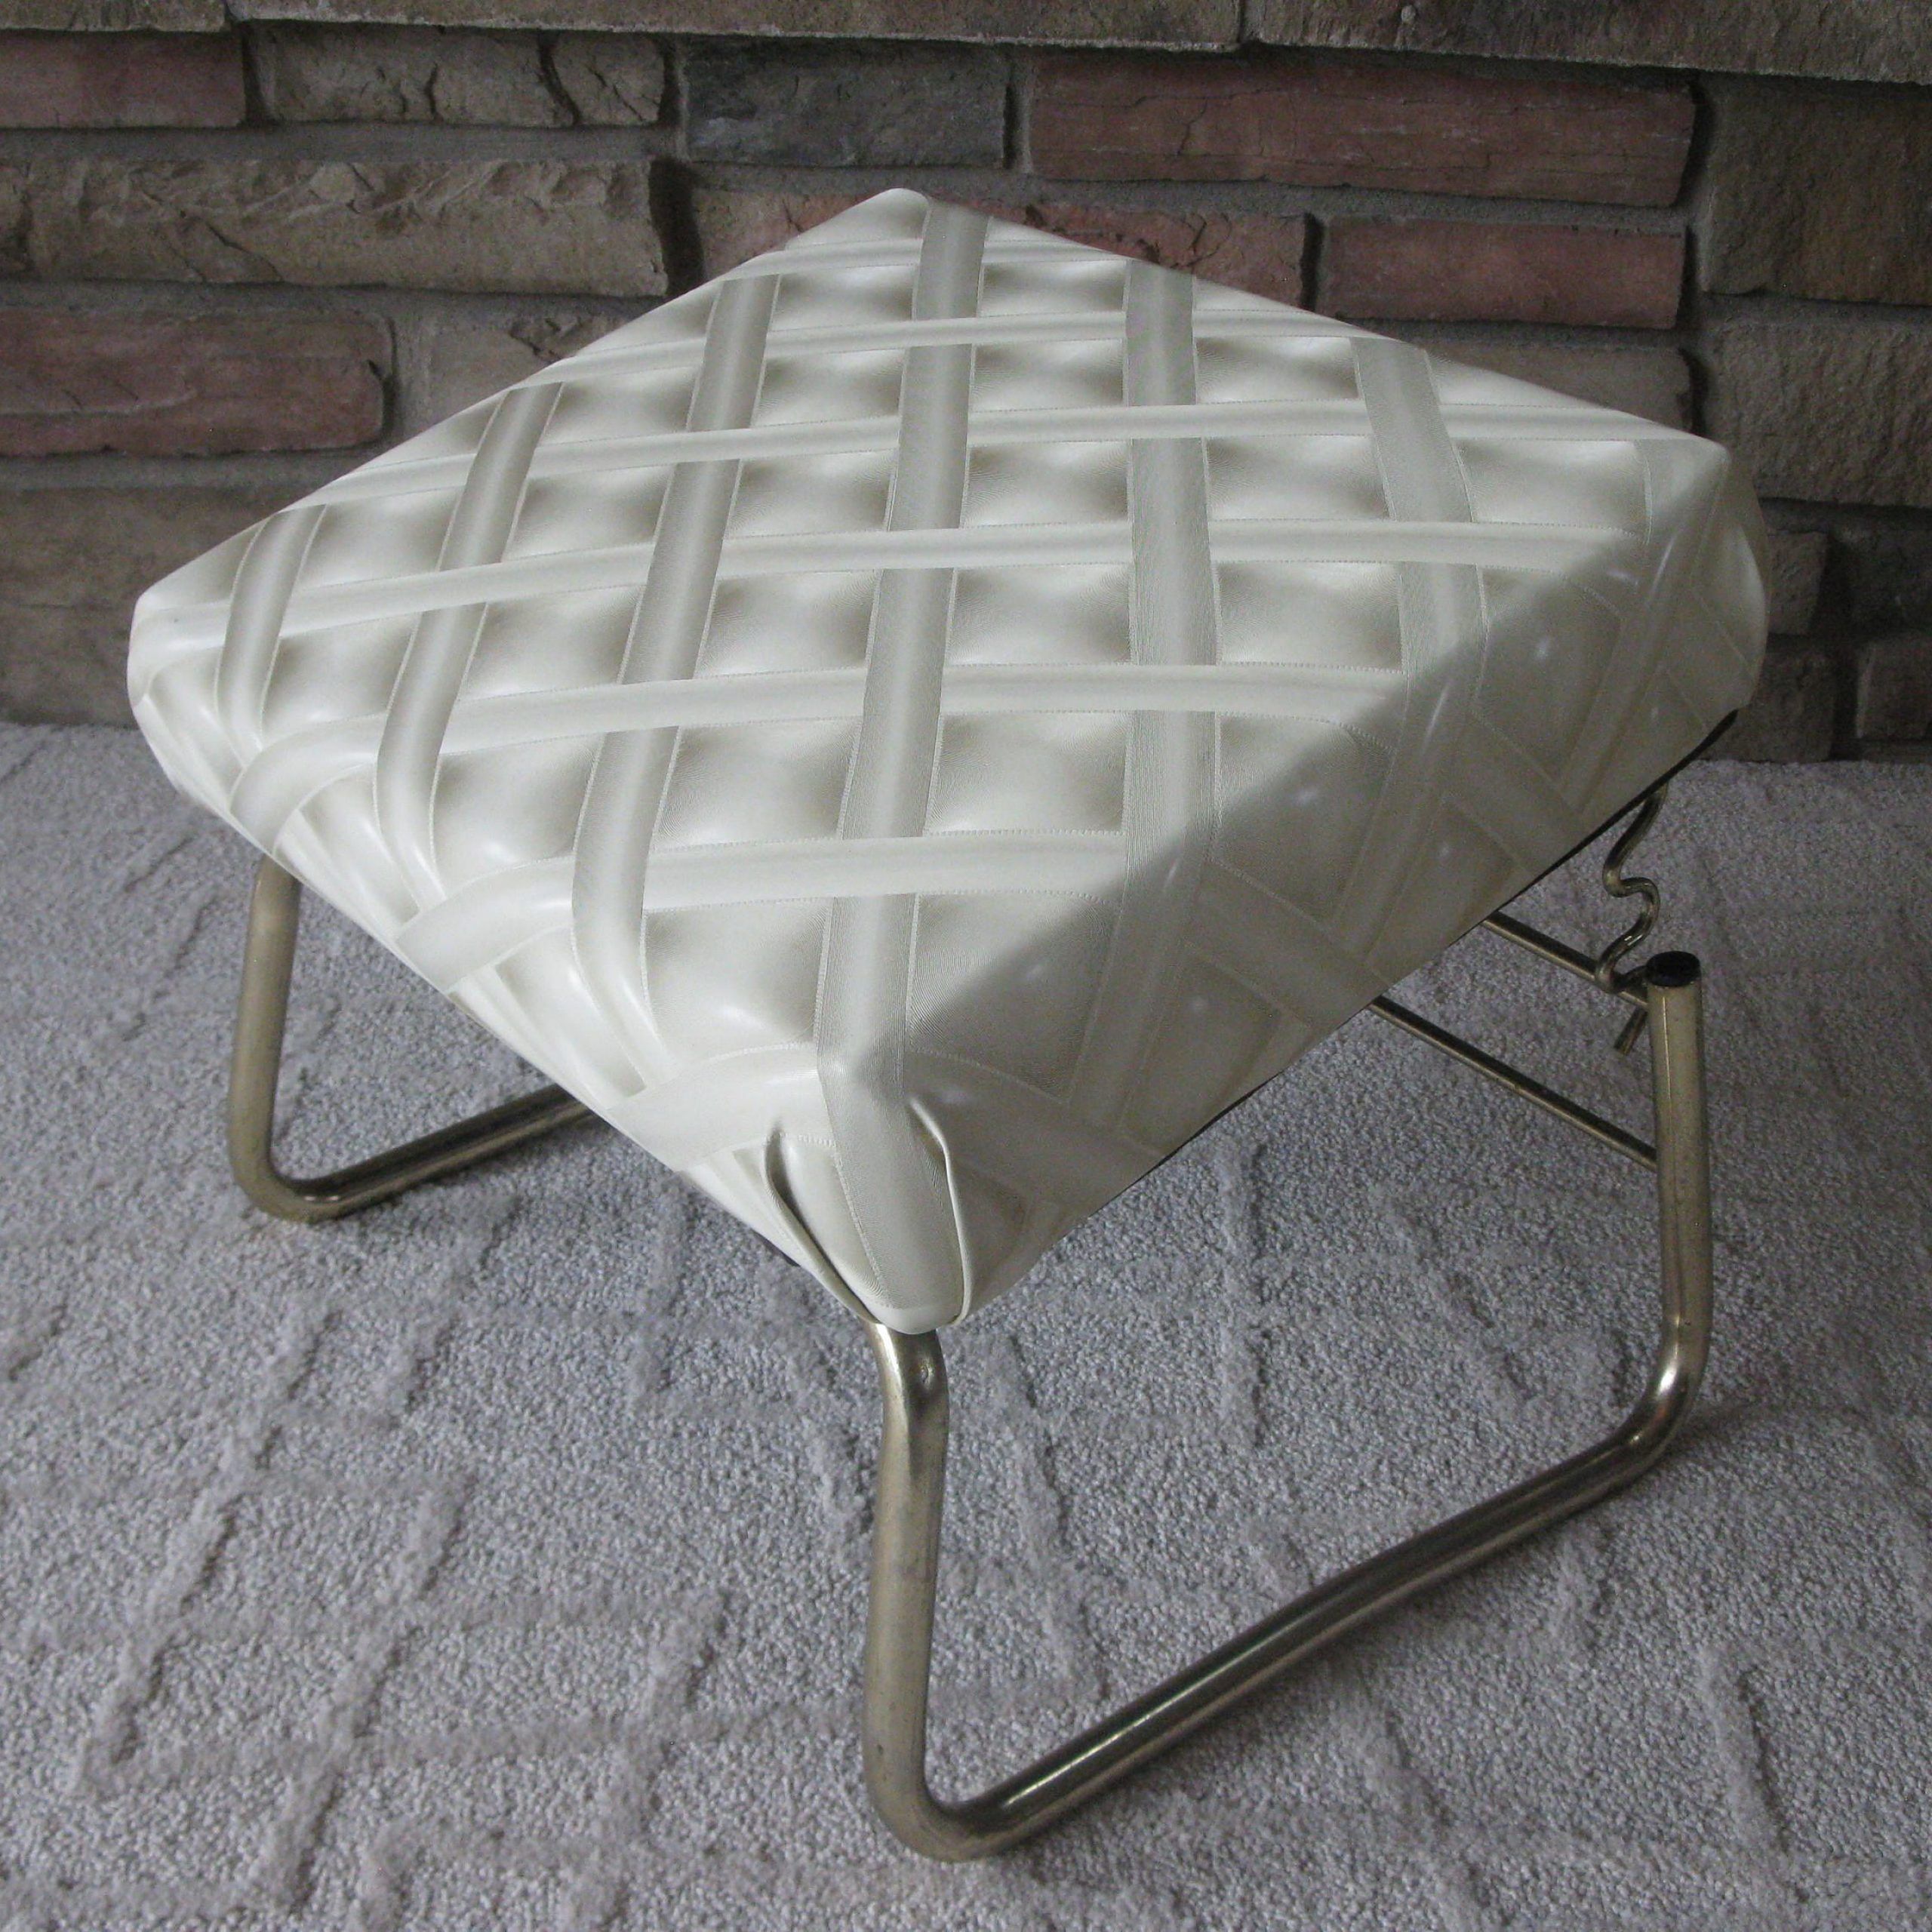 Retro Pearl Wick Leg Lounger  Ottoman  Beige  Adjustable Footstool Intended For Beige And White Tall Cylinder Pouf Ottomans (View 19 of 20)